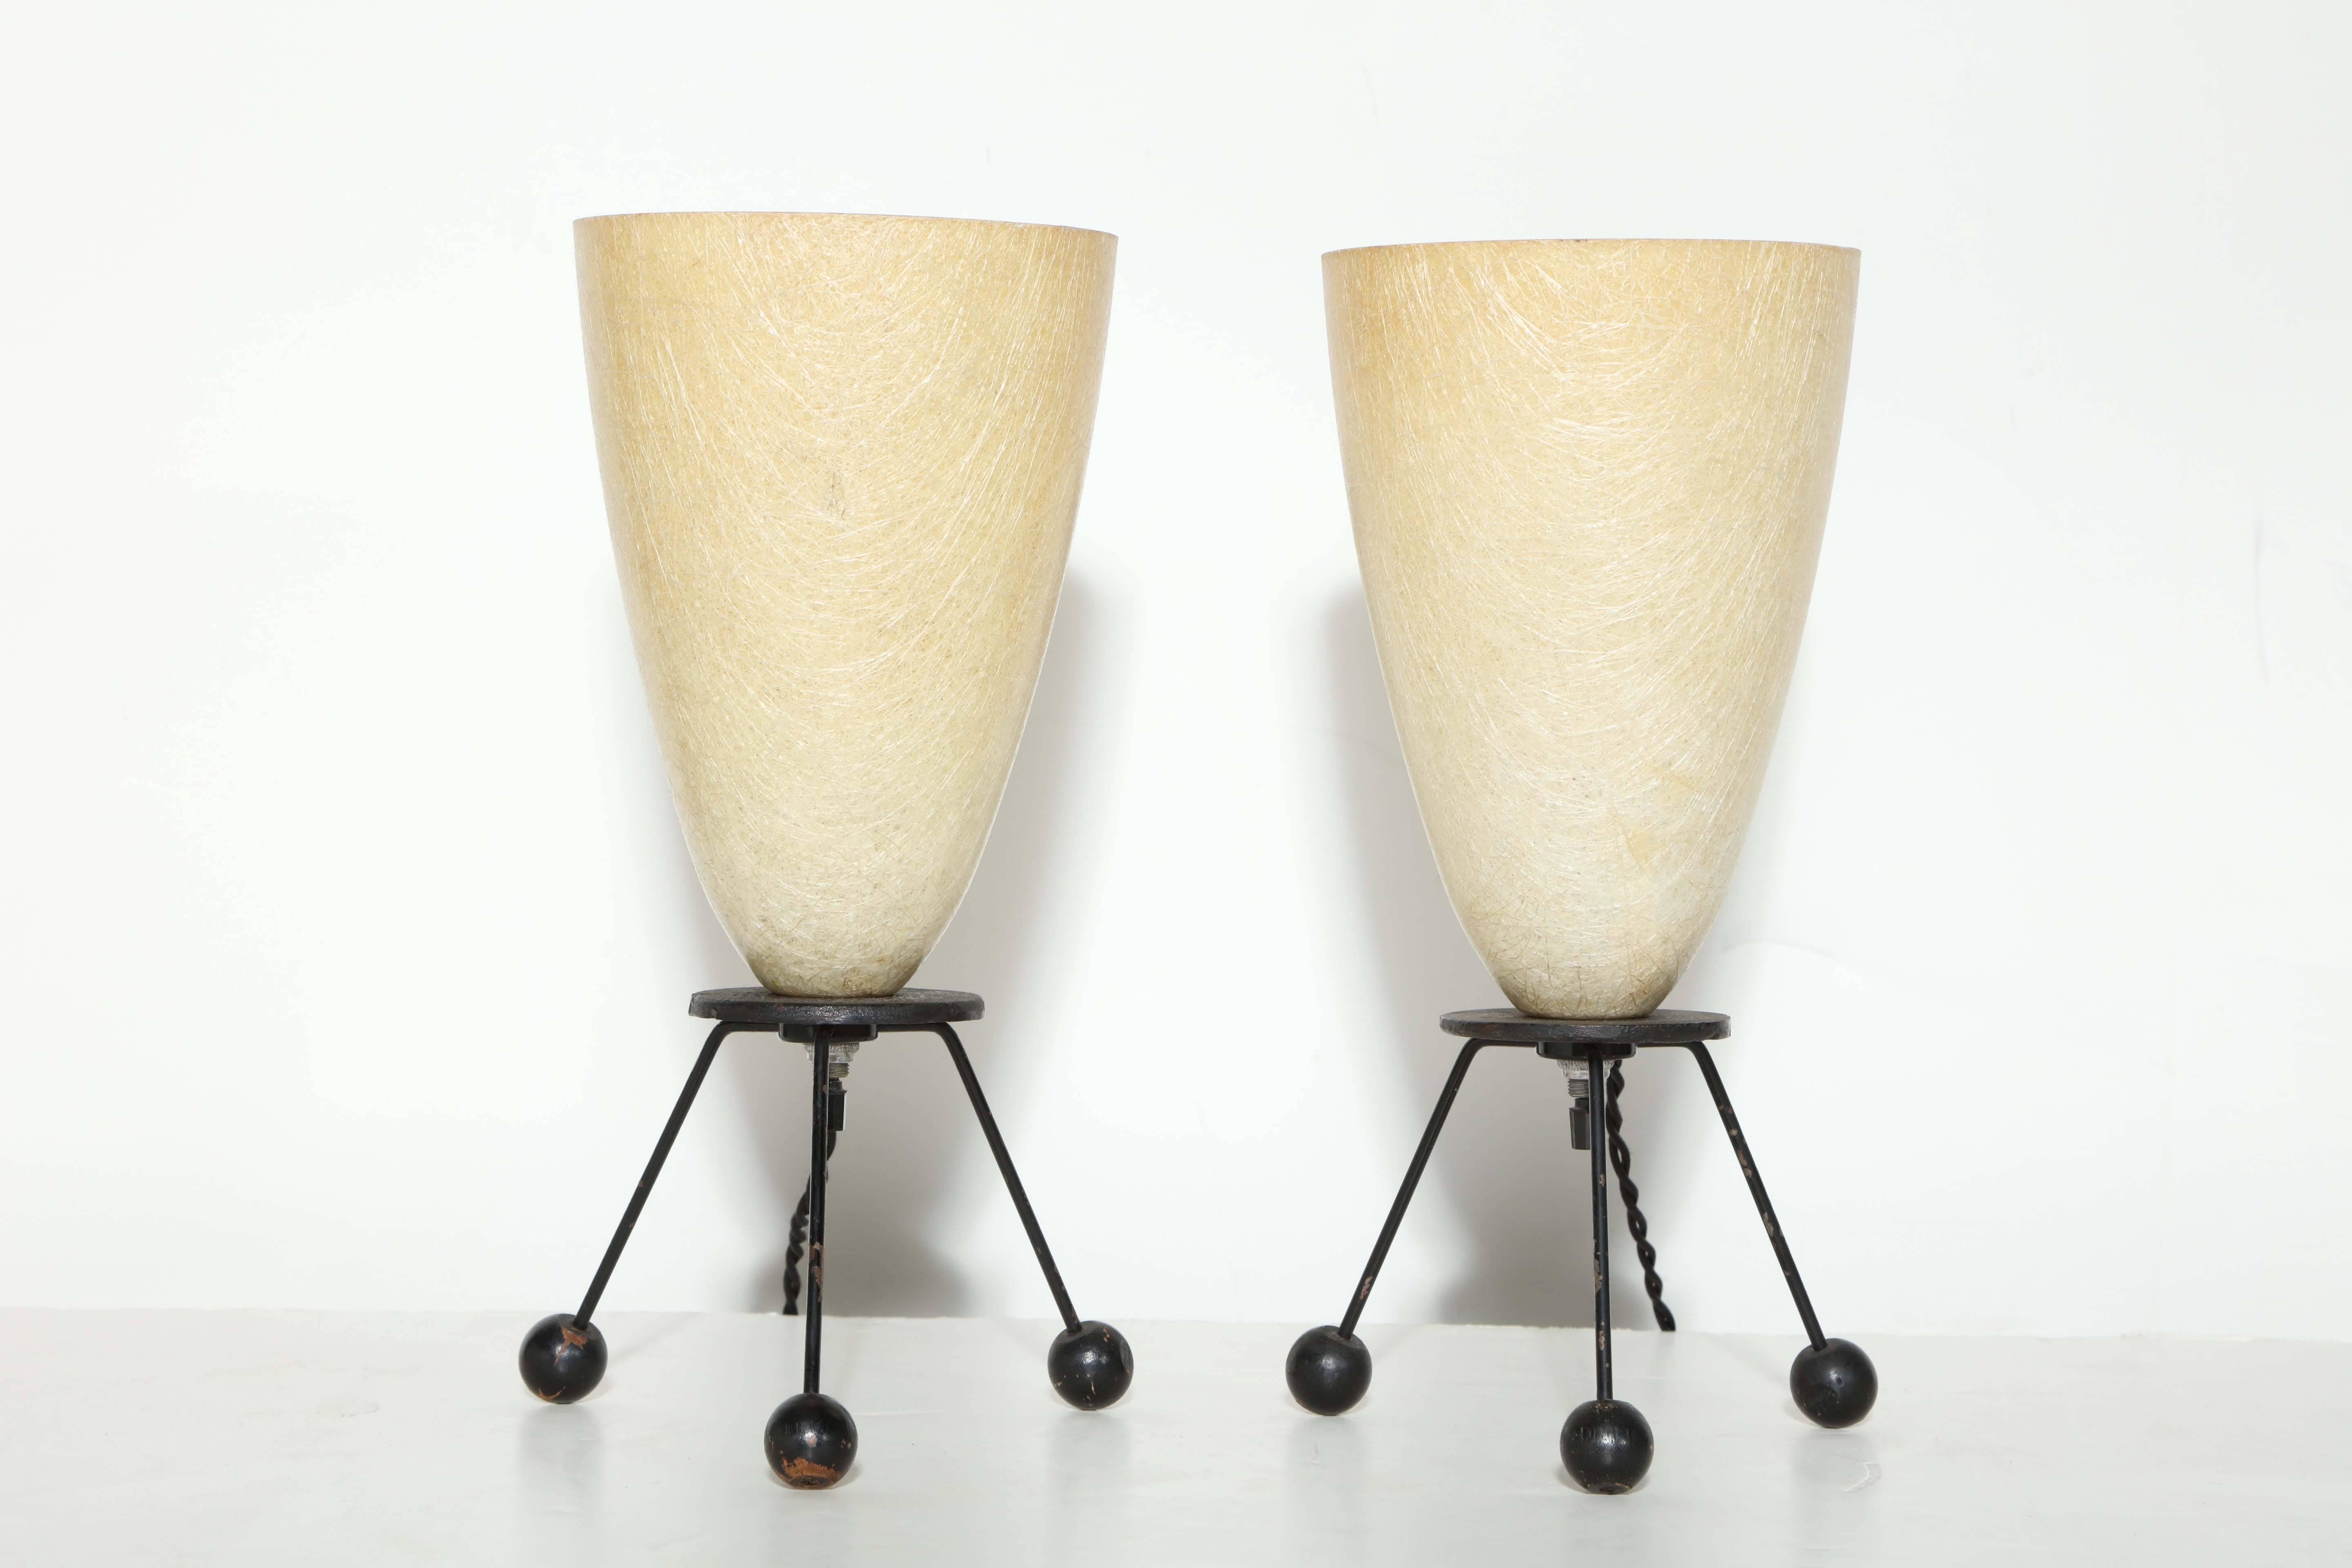 Smaller Pair Tripod Uplights, Sconces in Black Wire with Ball Feet and Cream Shades, 1950's, in the manner of Tony Paul.  Featuring articulating Pale Yellow Fiberglass bullet cone Shades, (shades articulate downward), round Black enameled metal